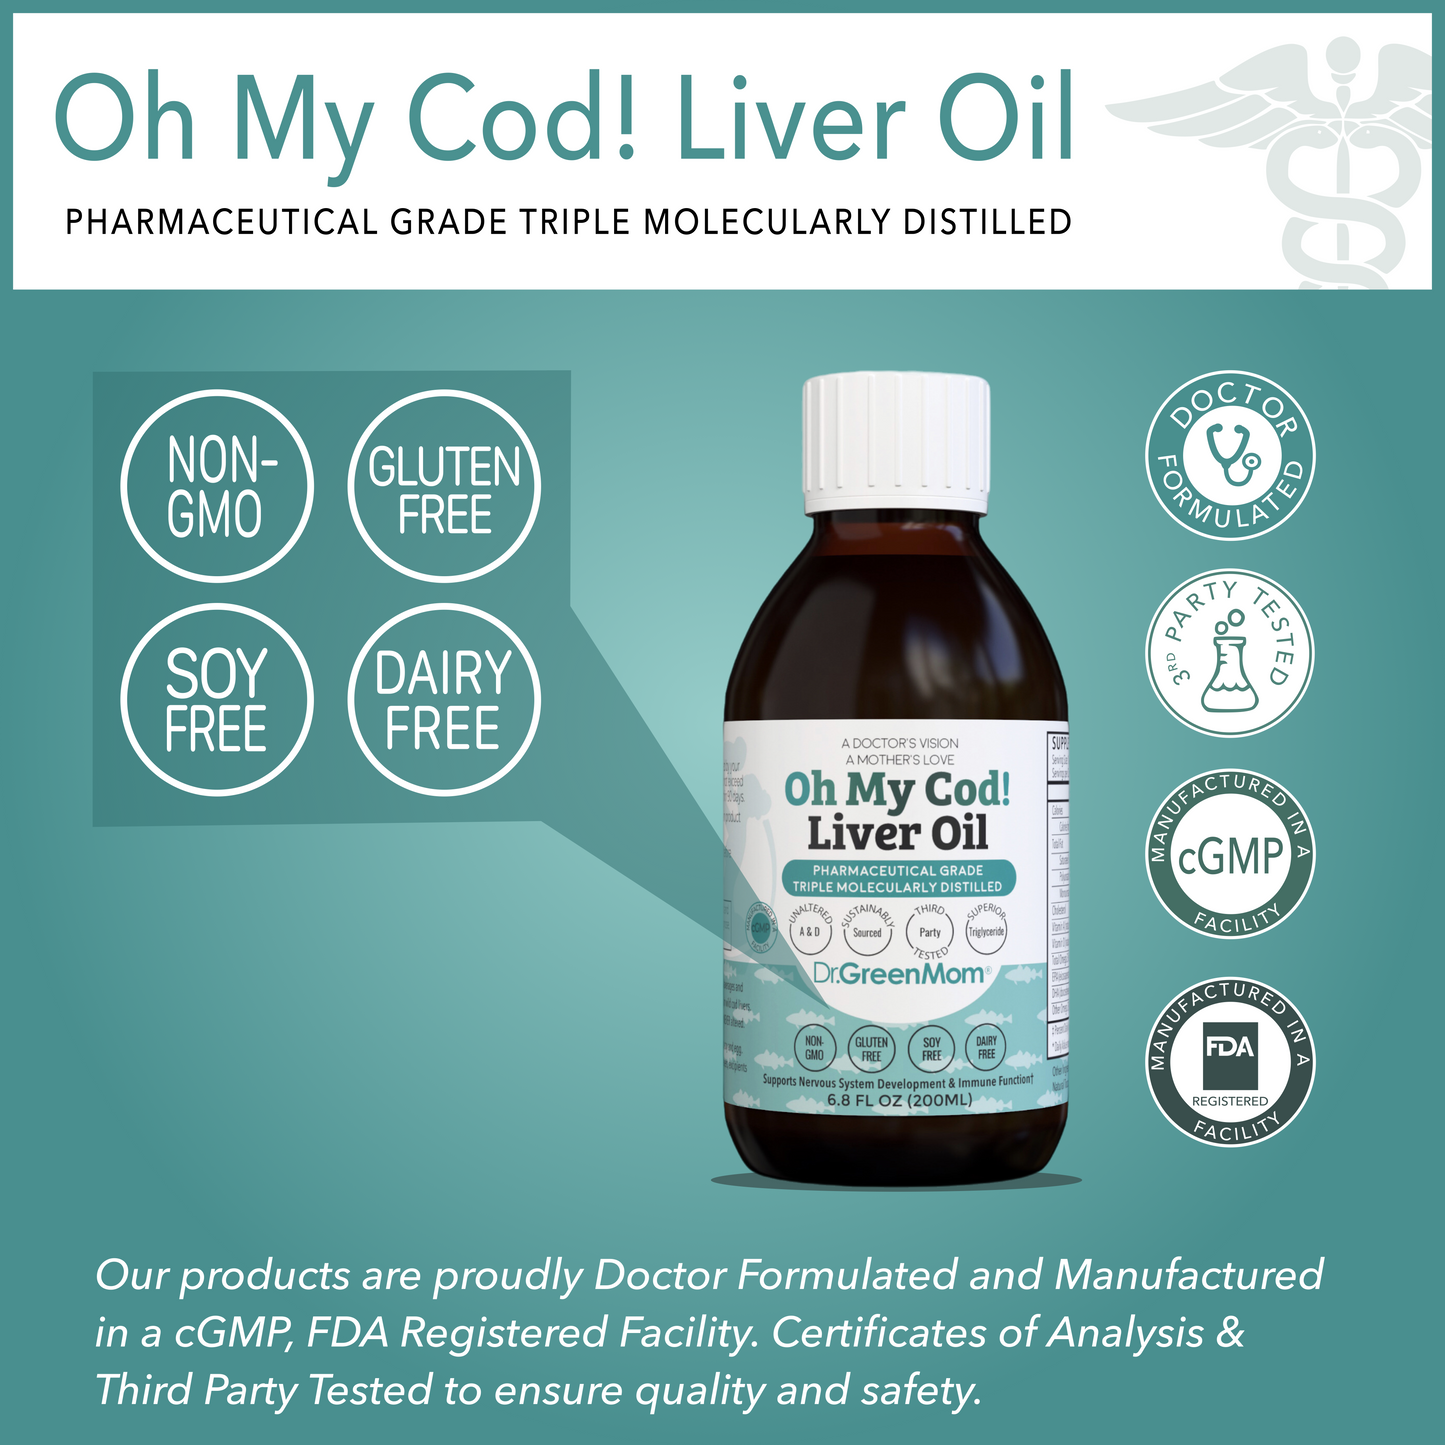 Oh My Cod! Liver Oil